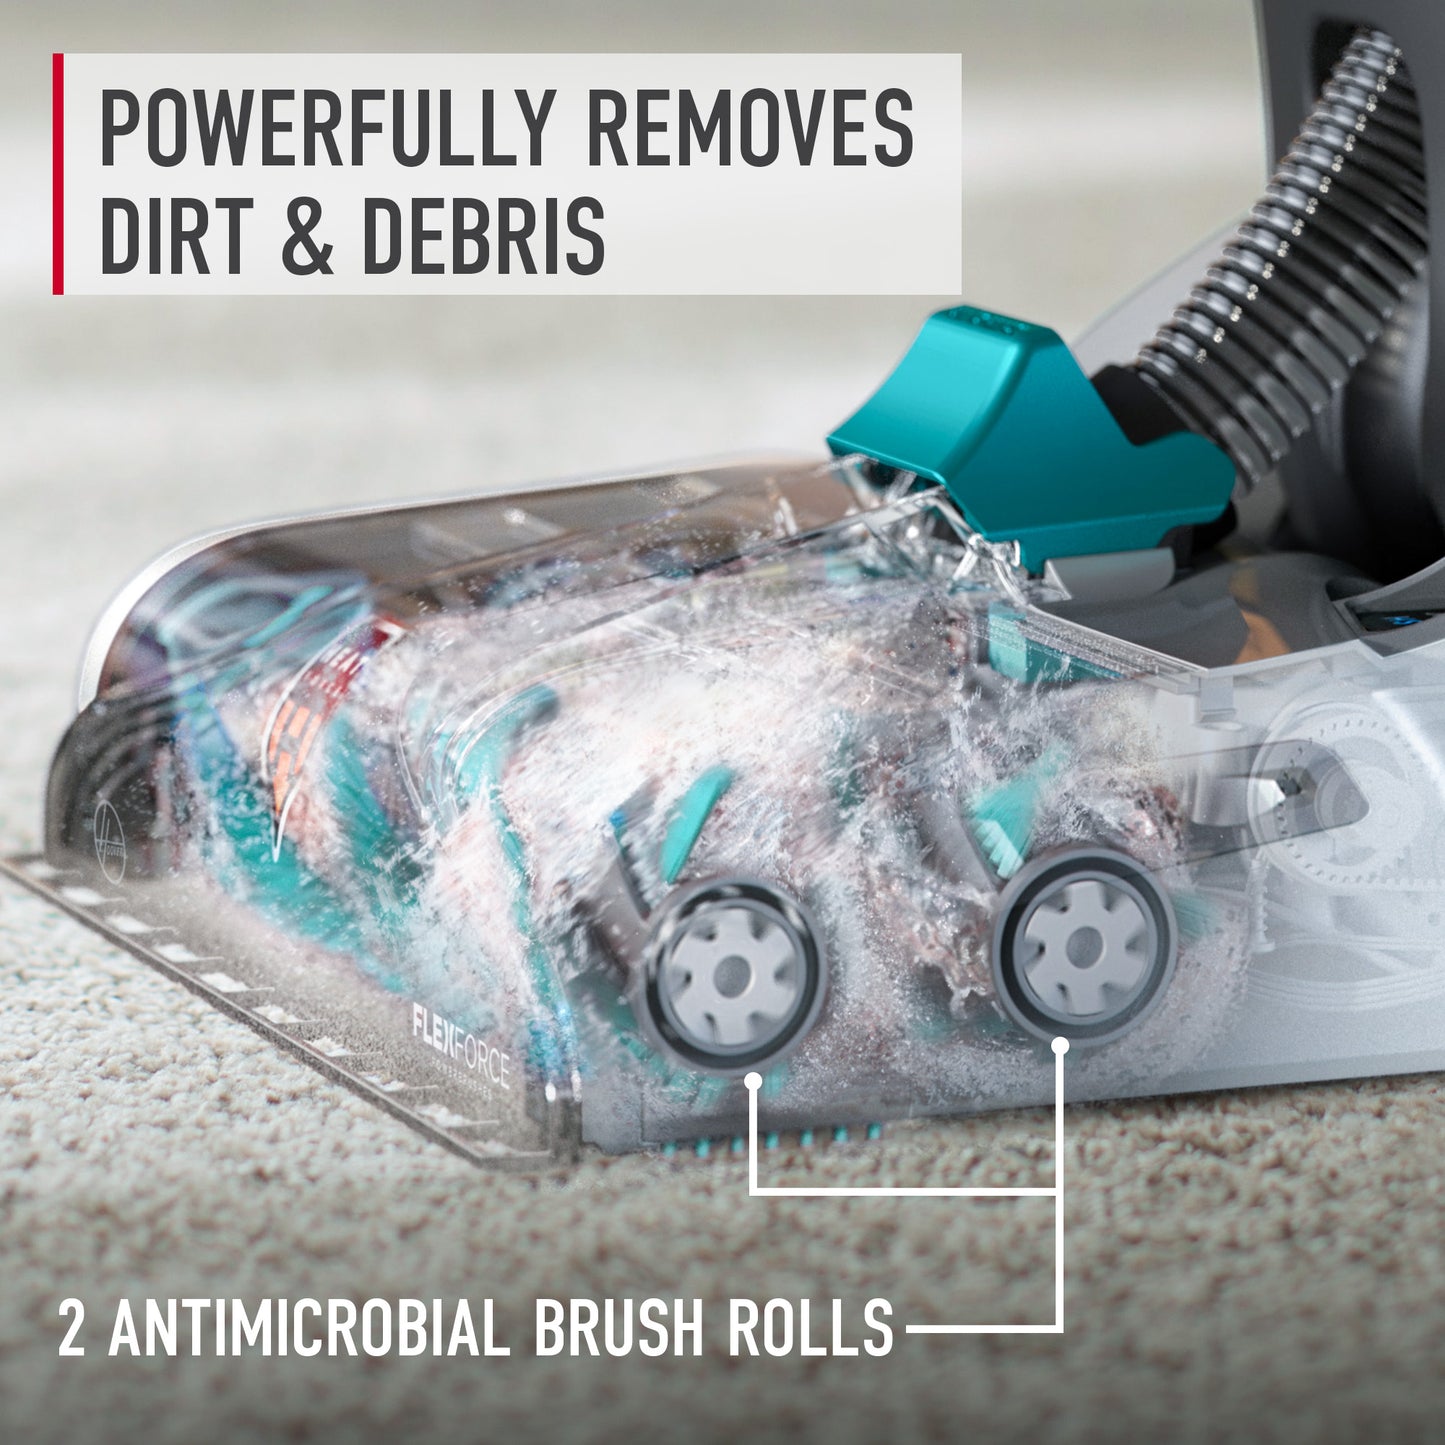 Hoover Smartwash+ automatic carpet cleaner with FlexForce antimicrobial brush rolls designed to powerfully remove deep dirt and debris